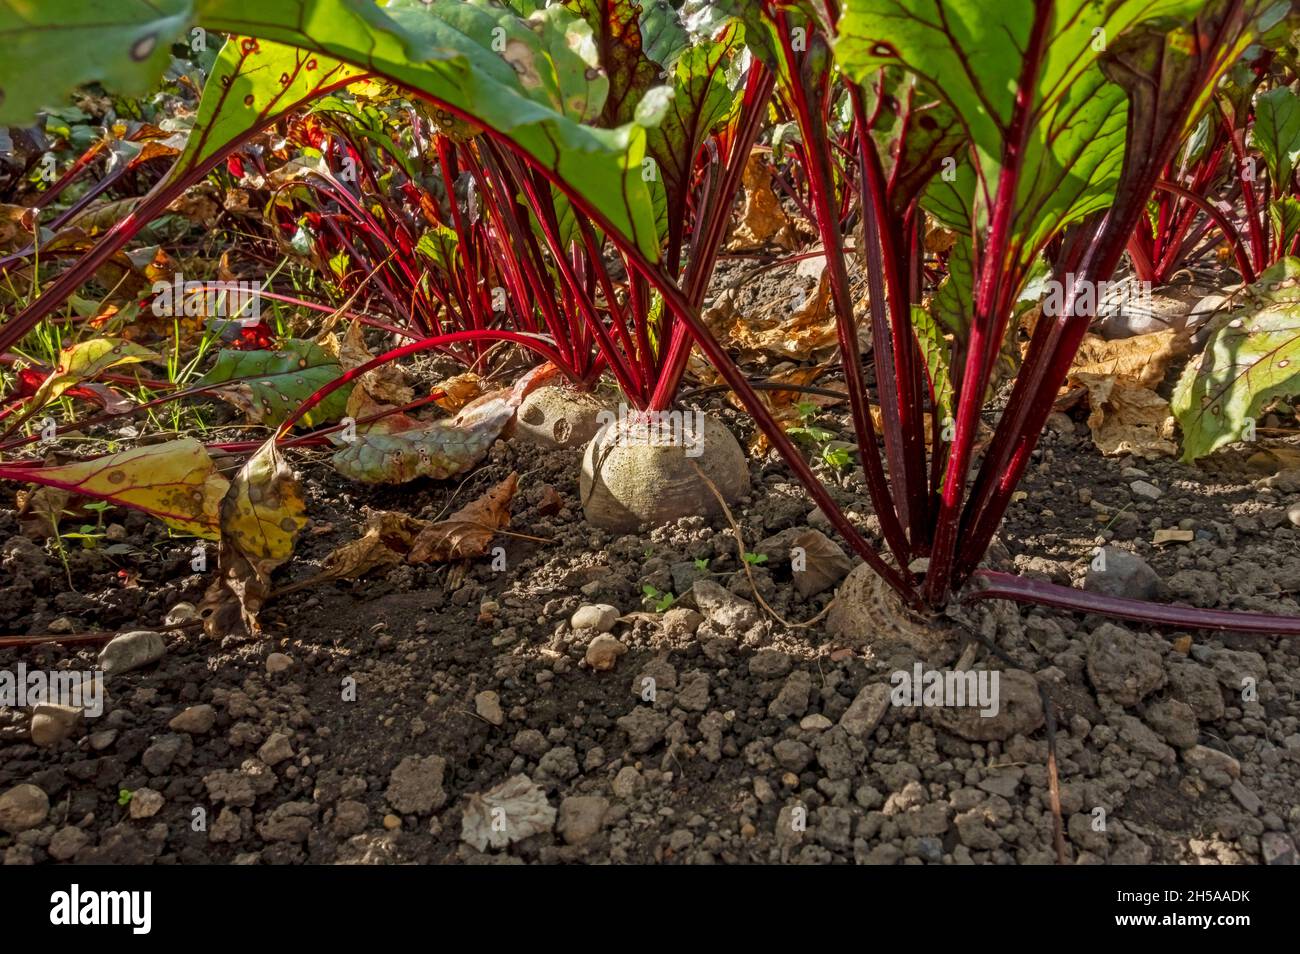 Close up of rows of beetroot plants growing in a vegetable garden  in summer England UK United Kingdom GB Great Britain Stock Photo